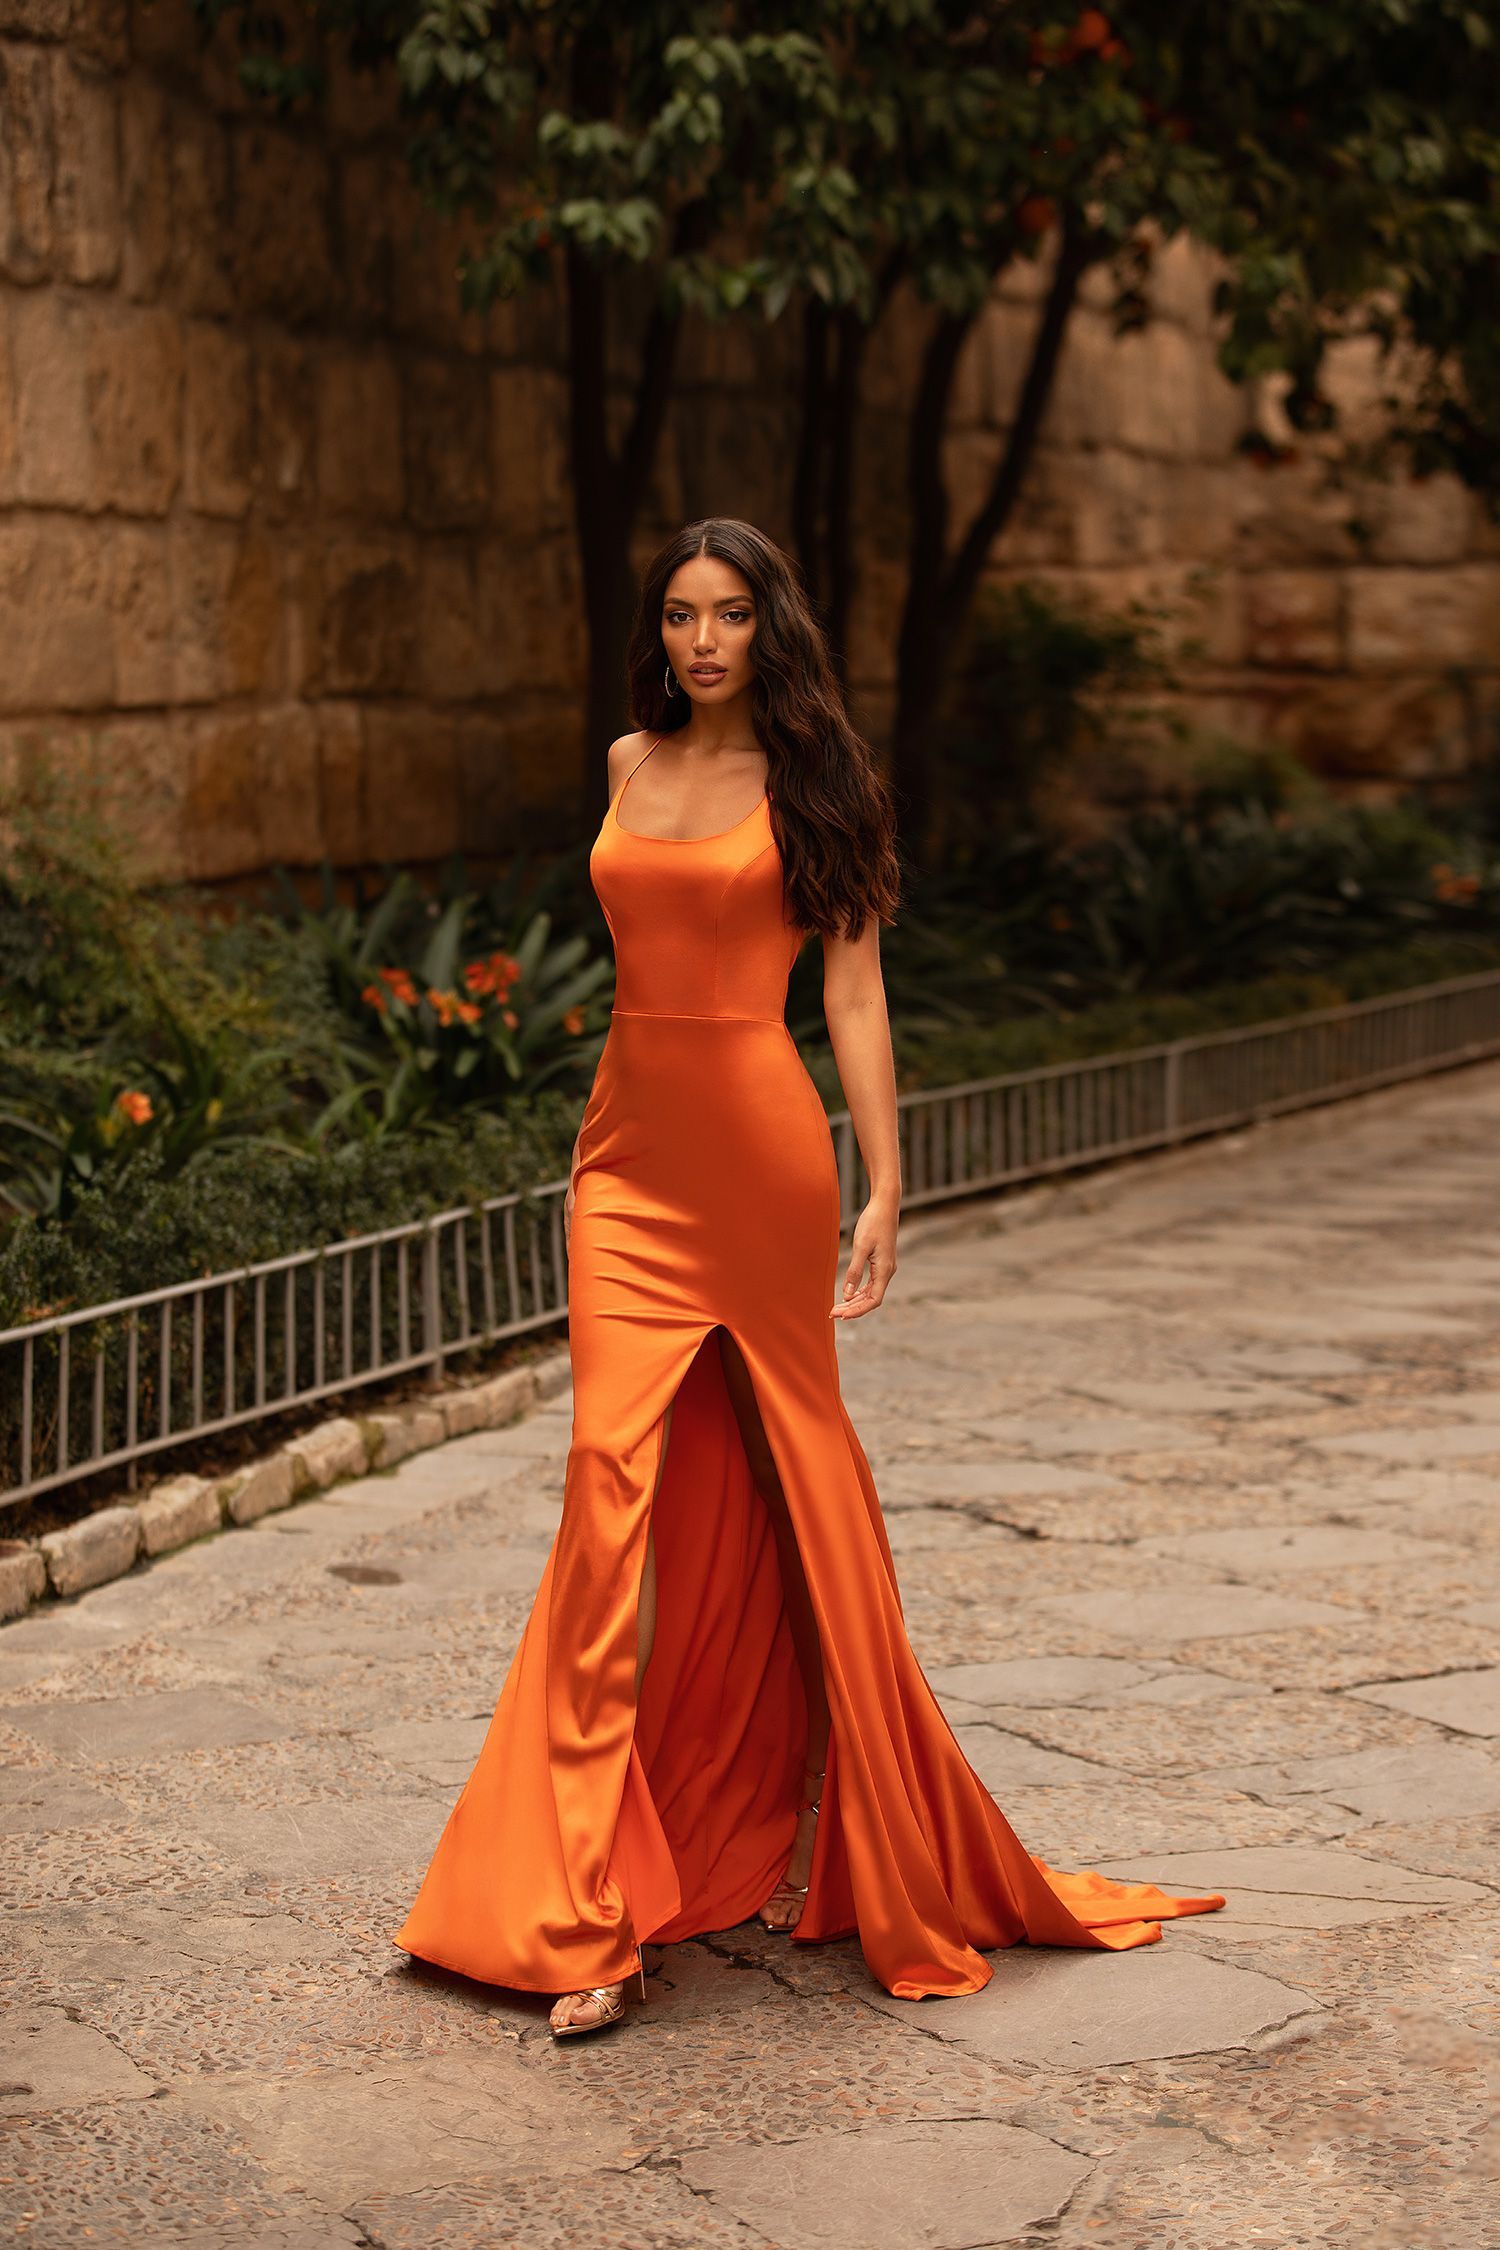 Orange Dress: Adding a Pop of Color to Your Wardrobe